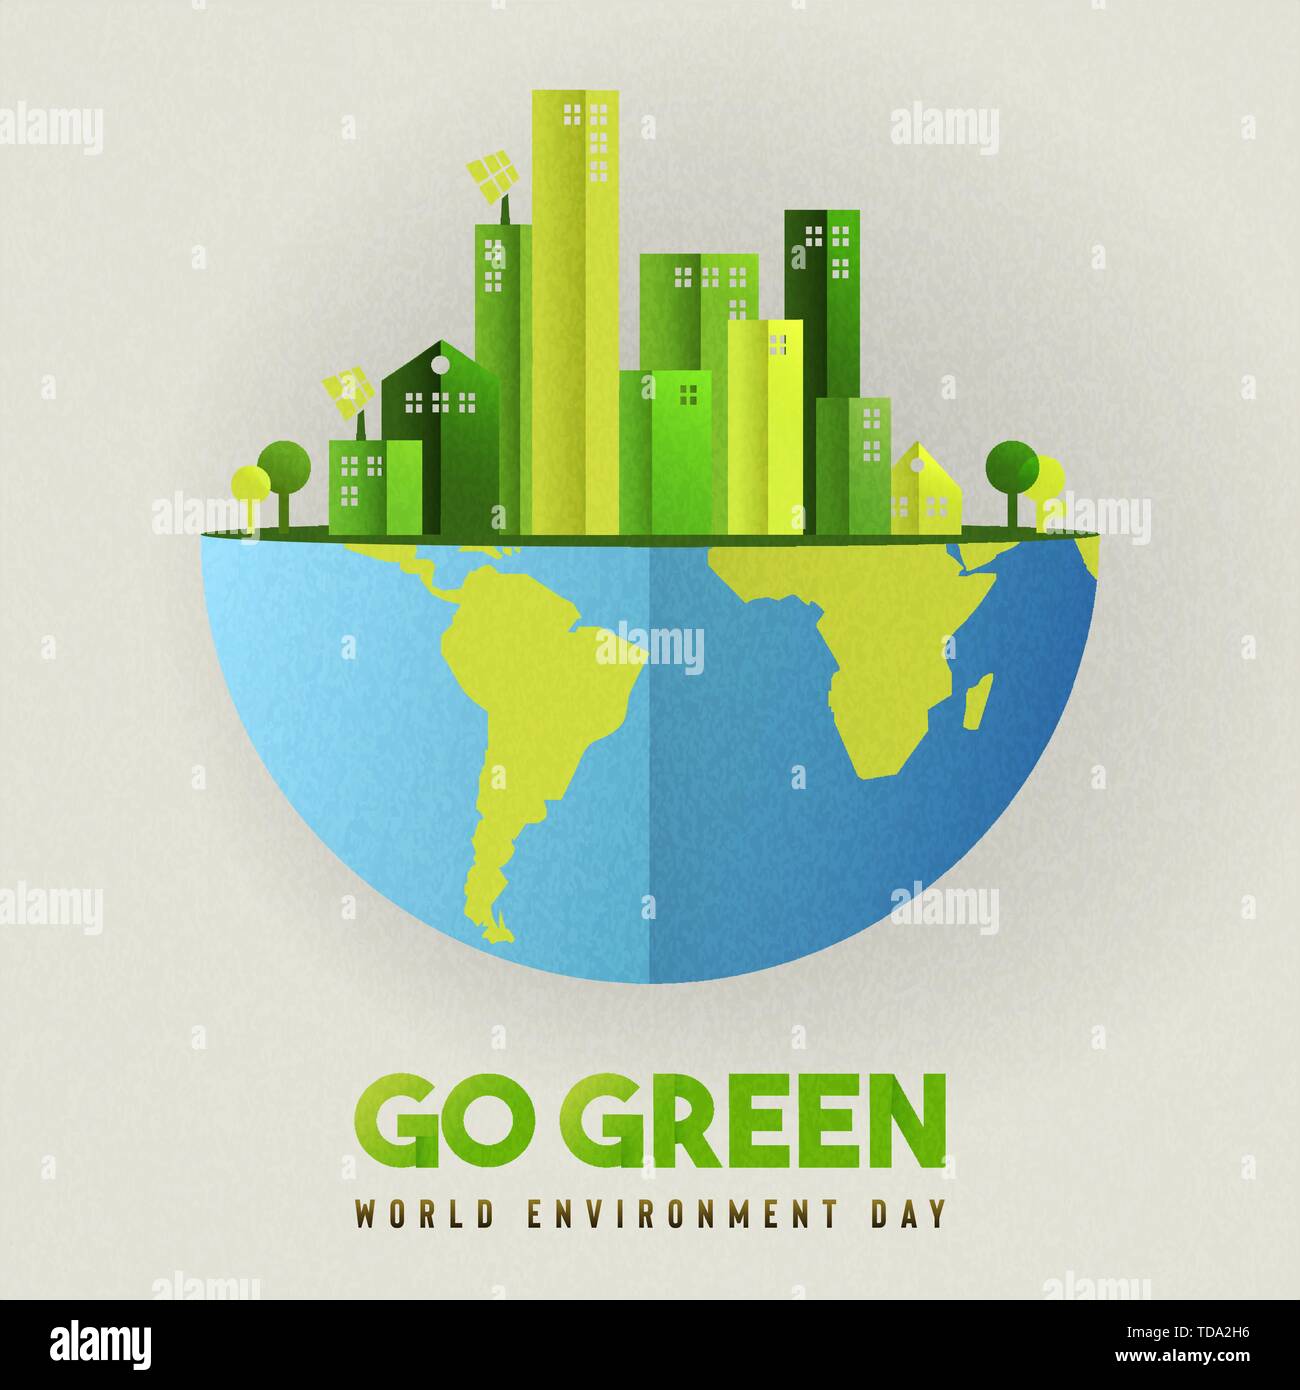 World environment day illustration. Eco friendly city concept with green buildings for sustainable urban lifestyle. Stock Vector